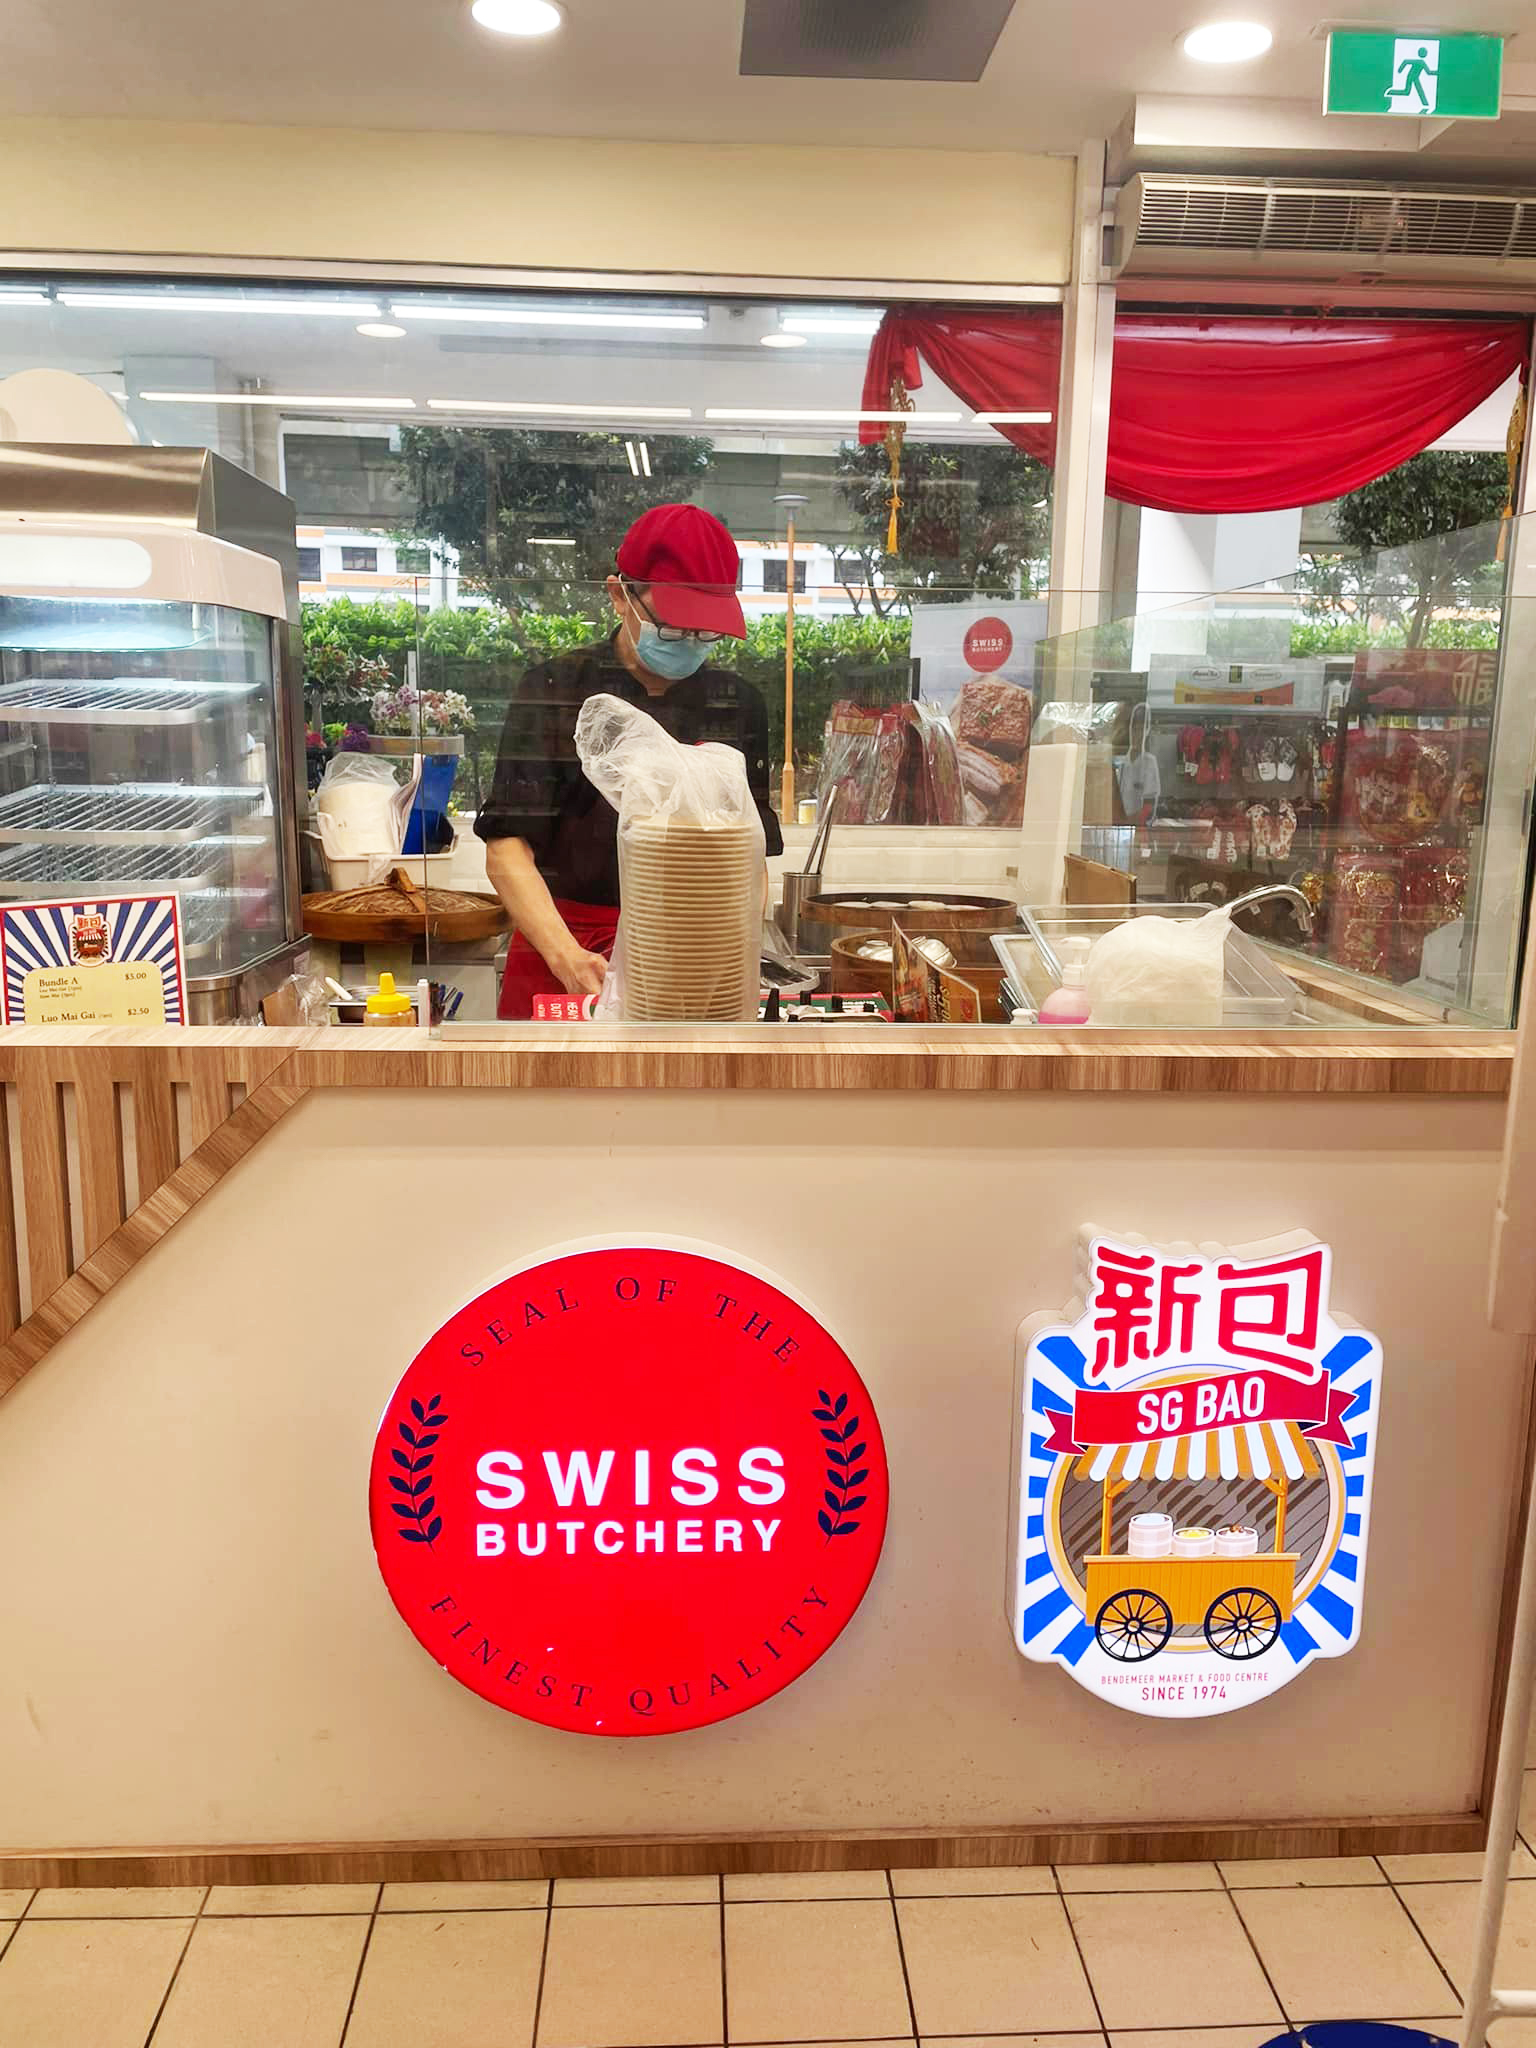 Singapore Bao has opened an outlet